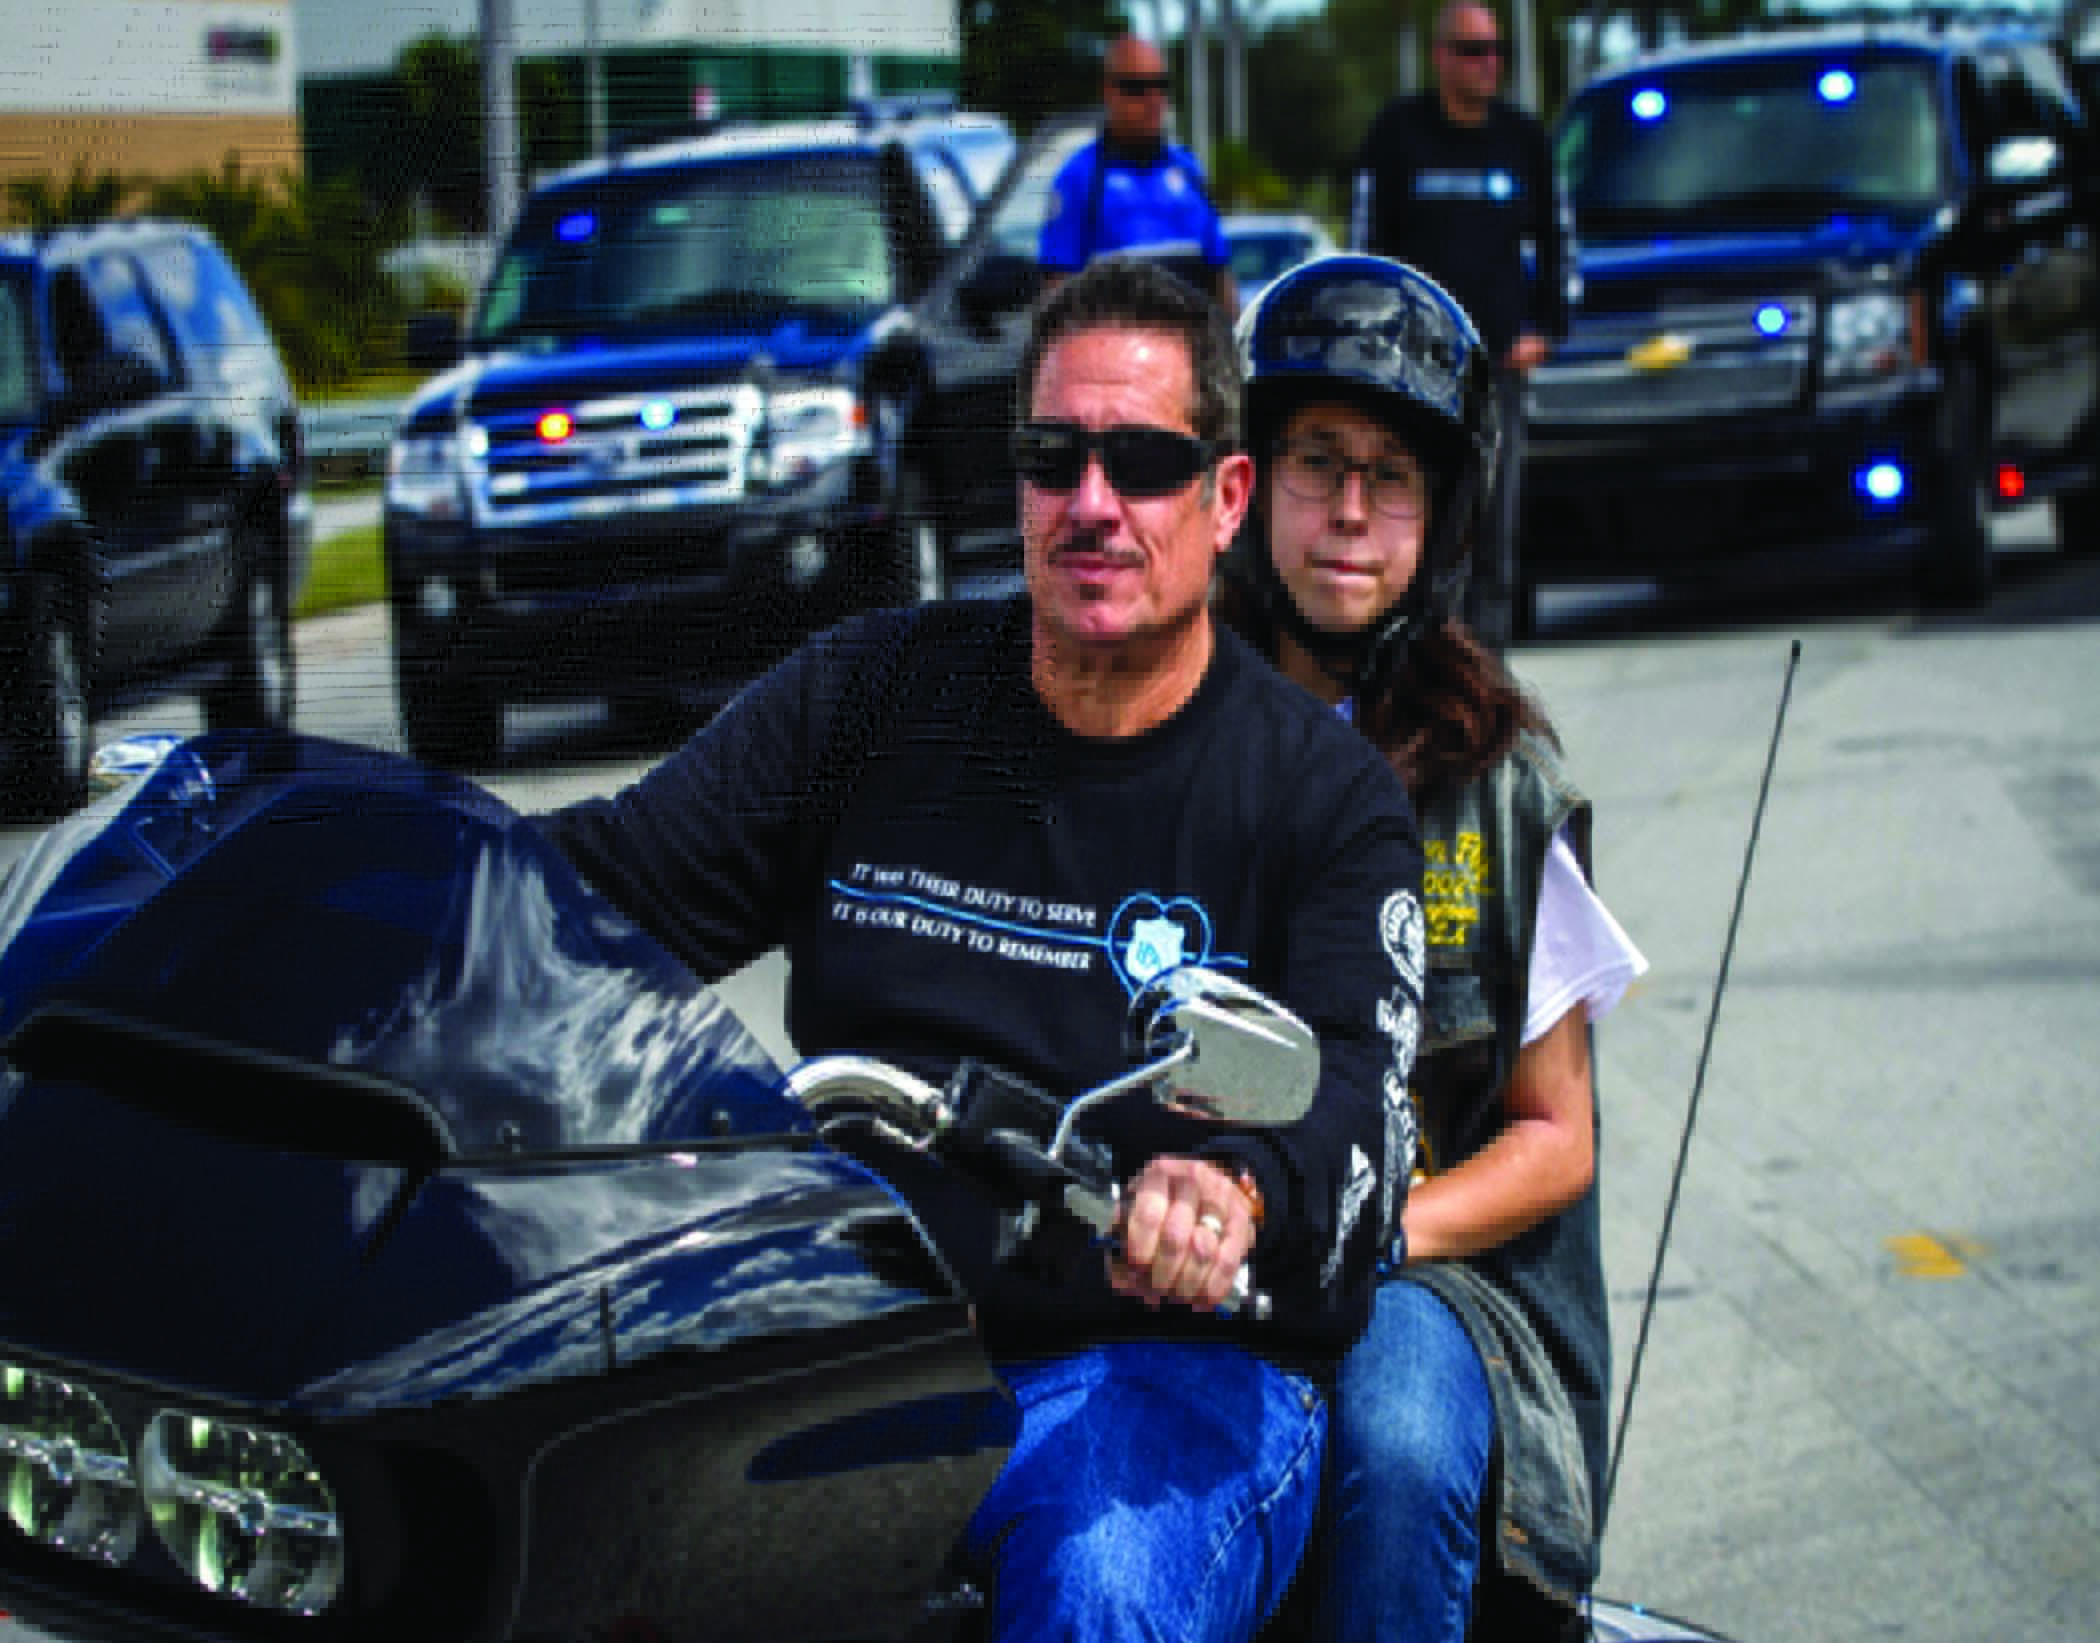 "Support Our Police" Ride & Rally